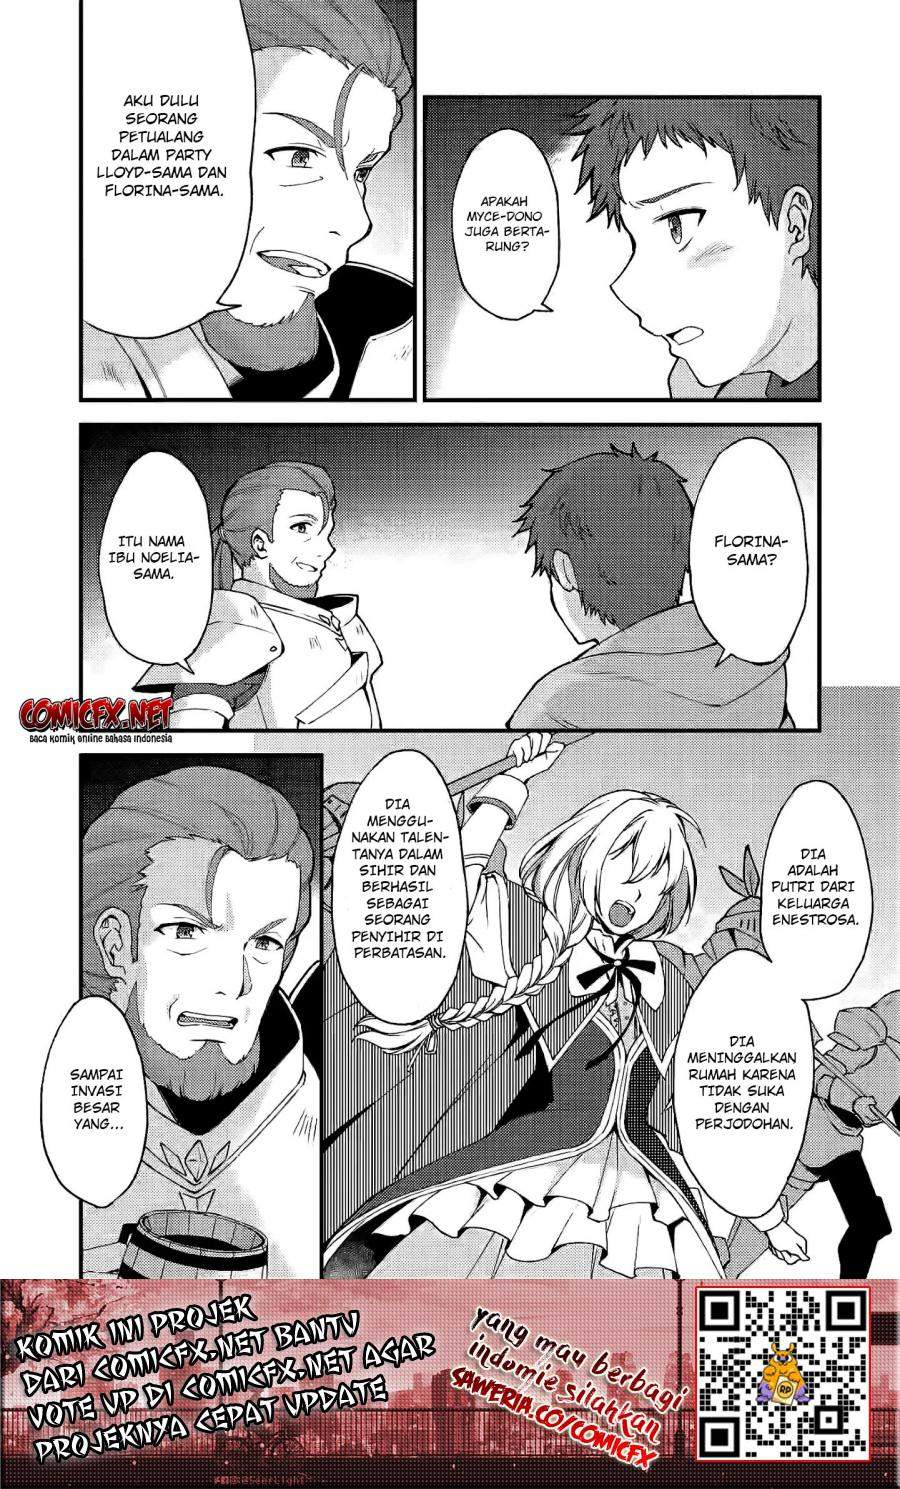 A Sword Master Childhood Friend Power Harassed Me Harshly, So I Broke off Our Relationship and Make a Fresh Start at the Frontier as a Magic Swordsman Chapter 06.2